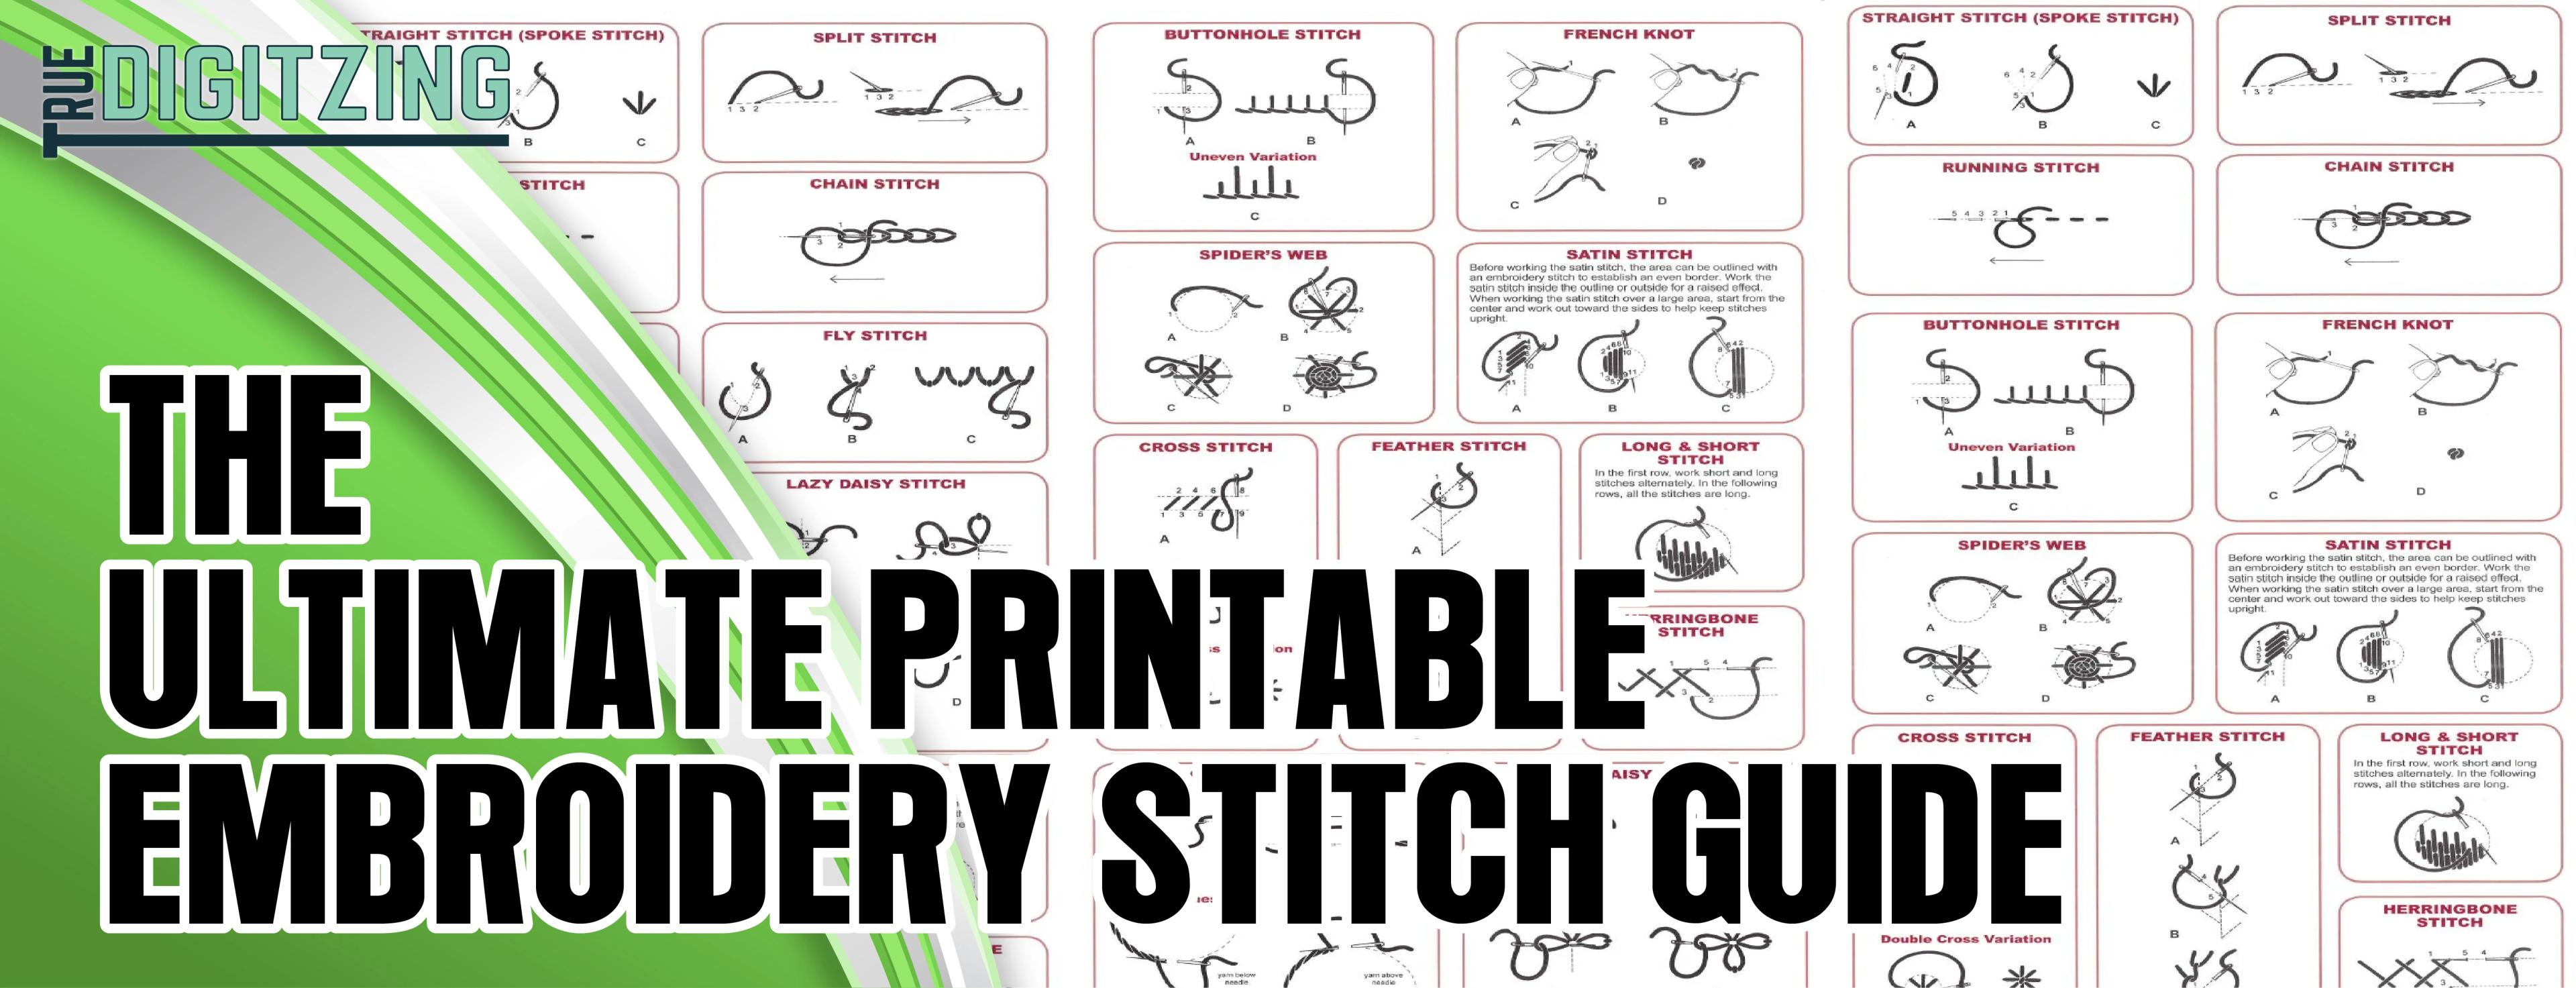 Printable Embroidery Stitch Guide